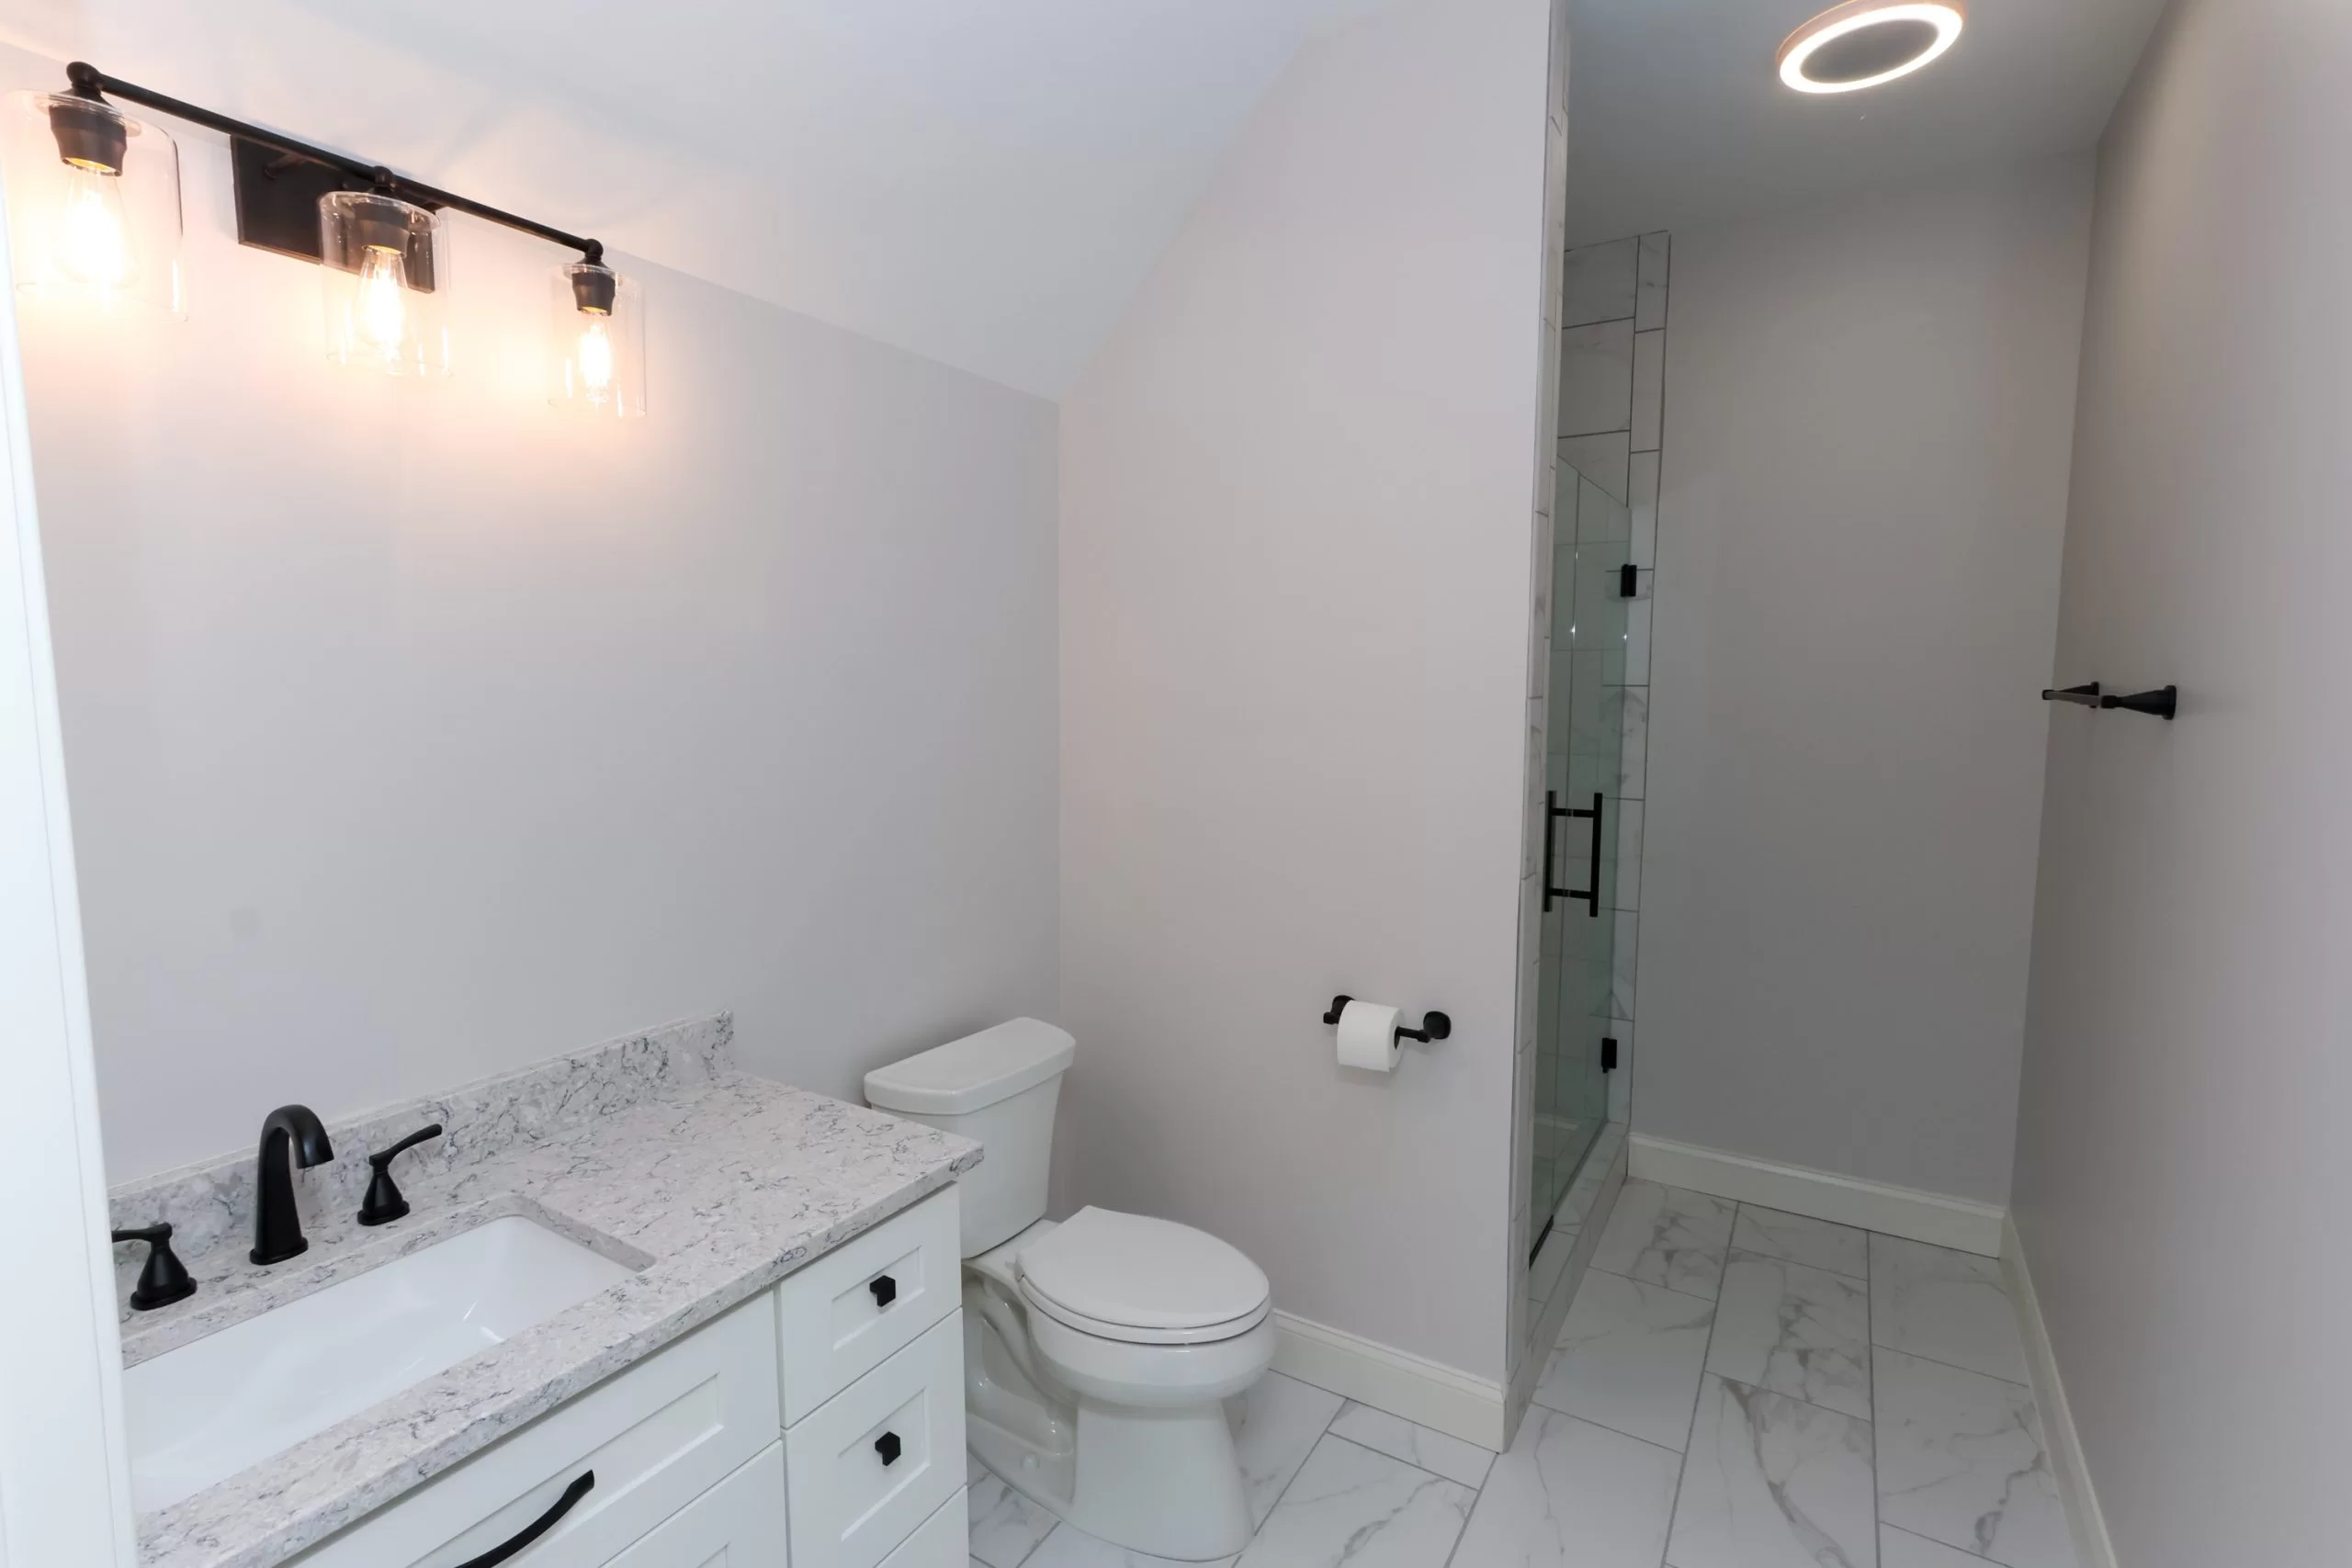 Roomy Full bathroom added to attic finish in Cary NC